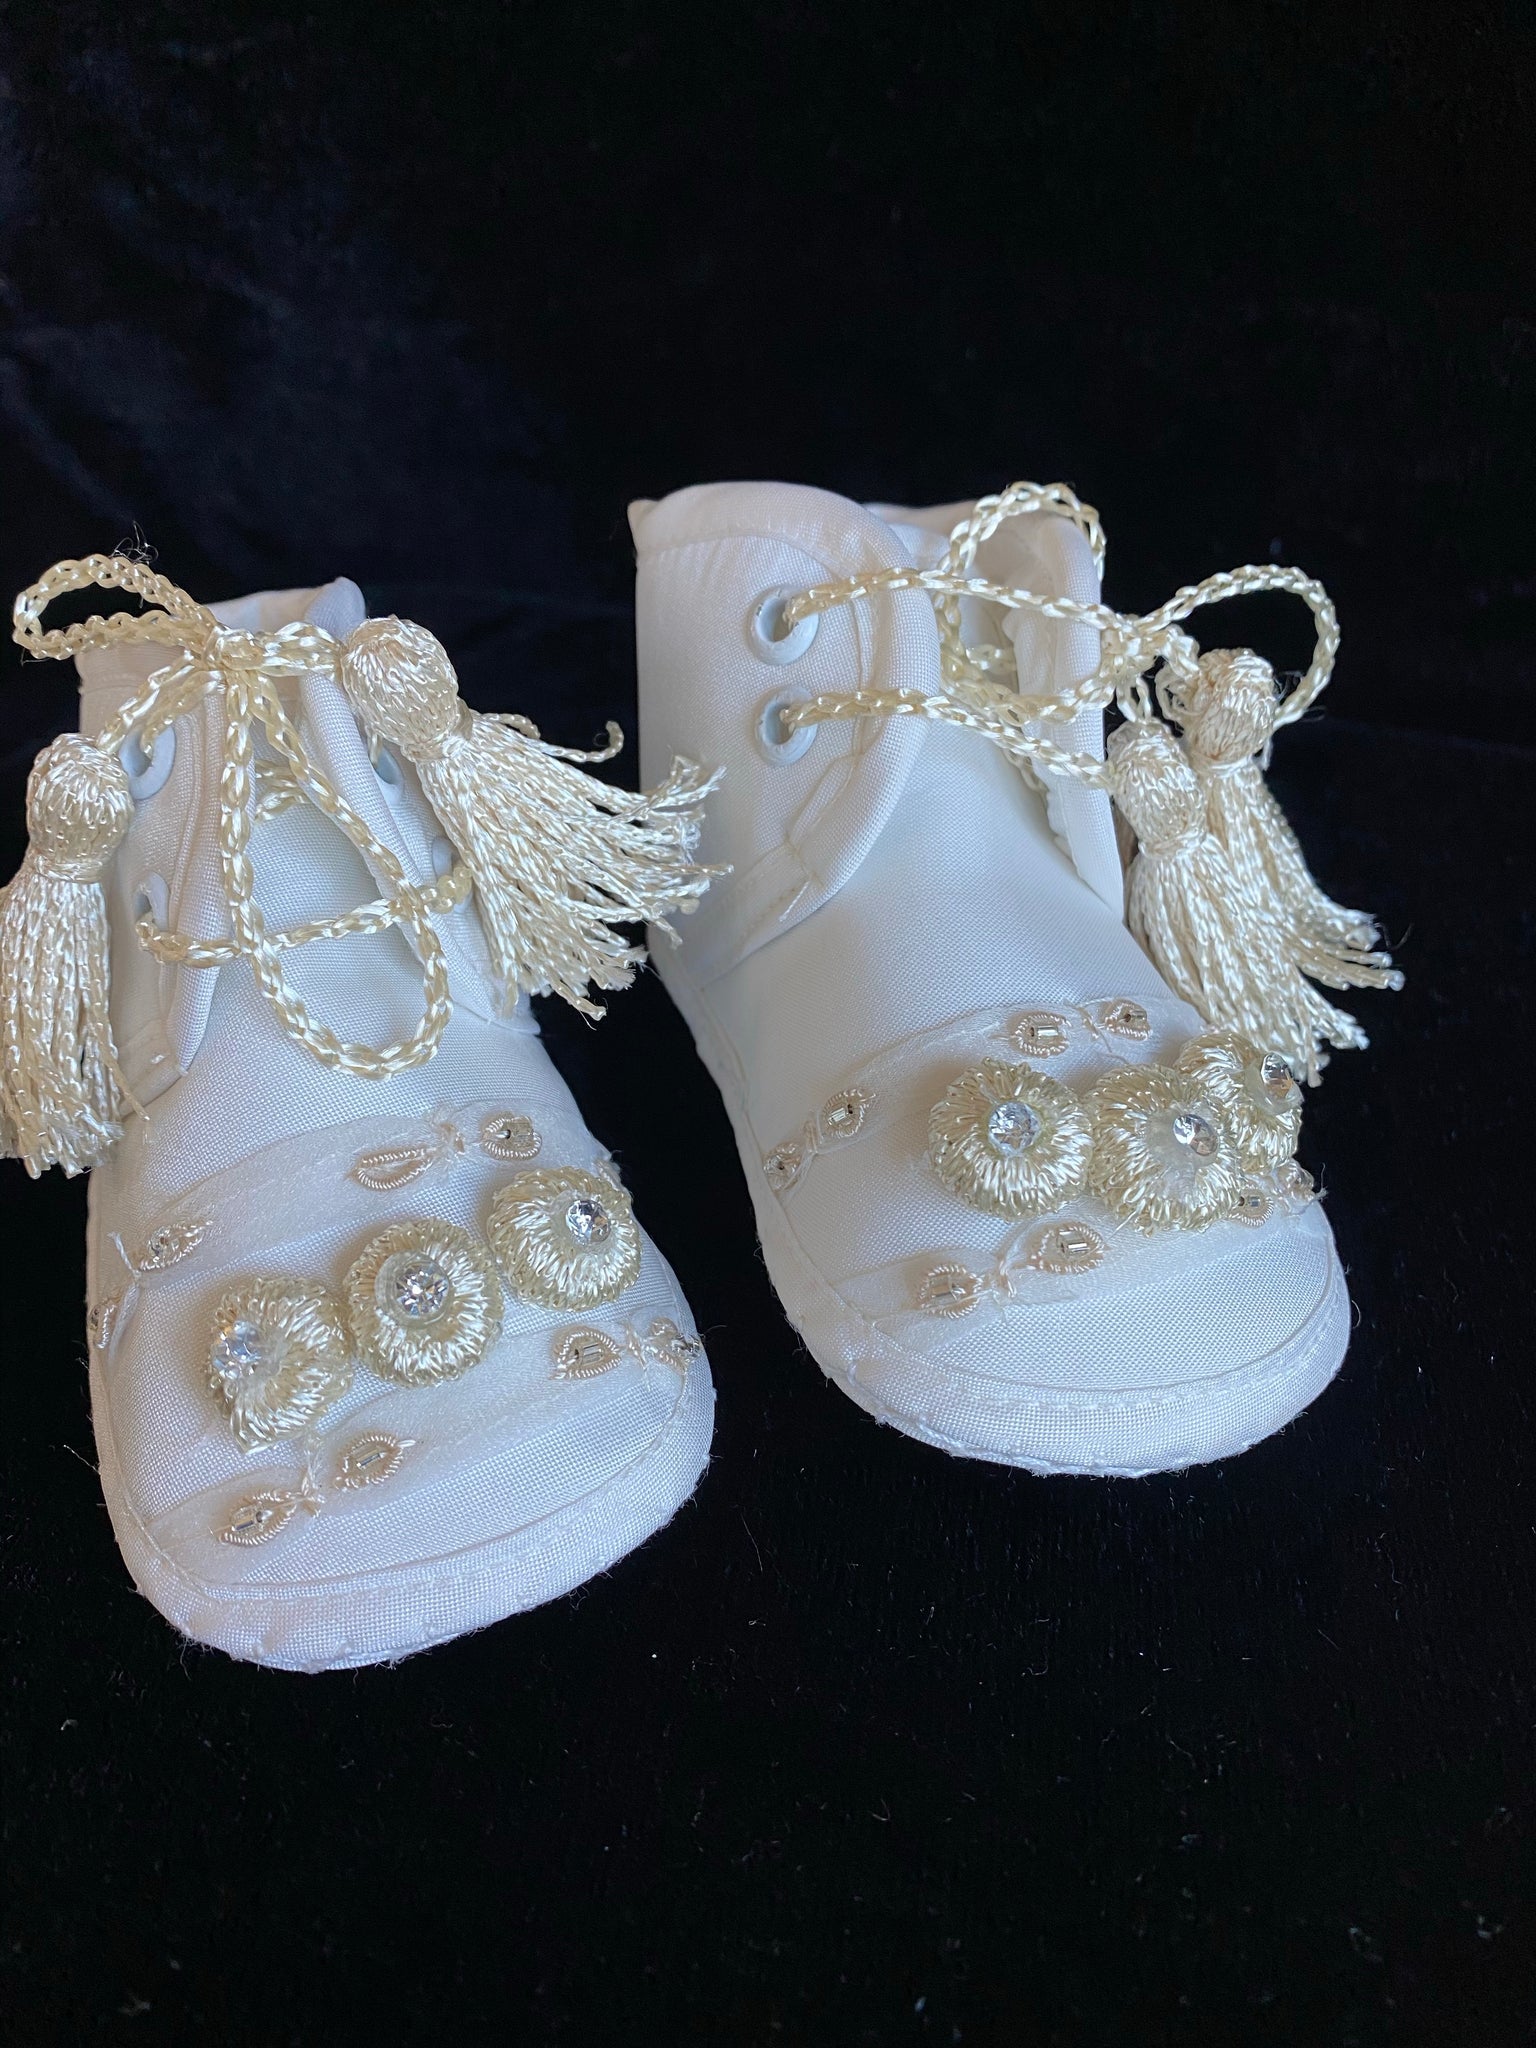 Elegant handmade English style ankle boots in ivory and white with ribbons, embroidery, jewels, and tassel like laces.